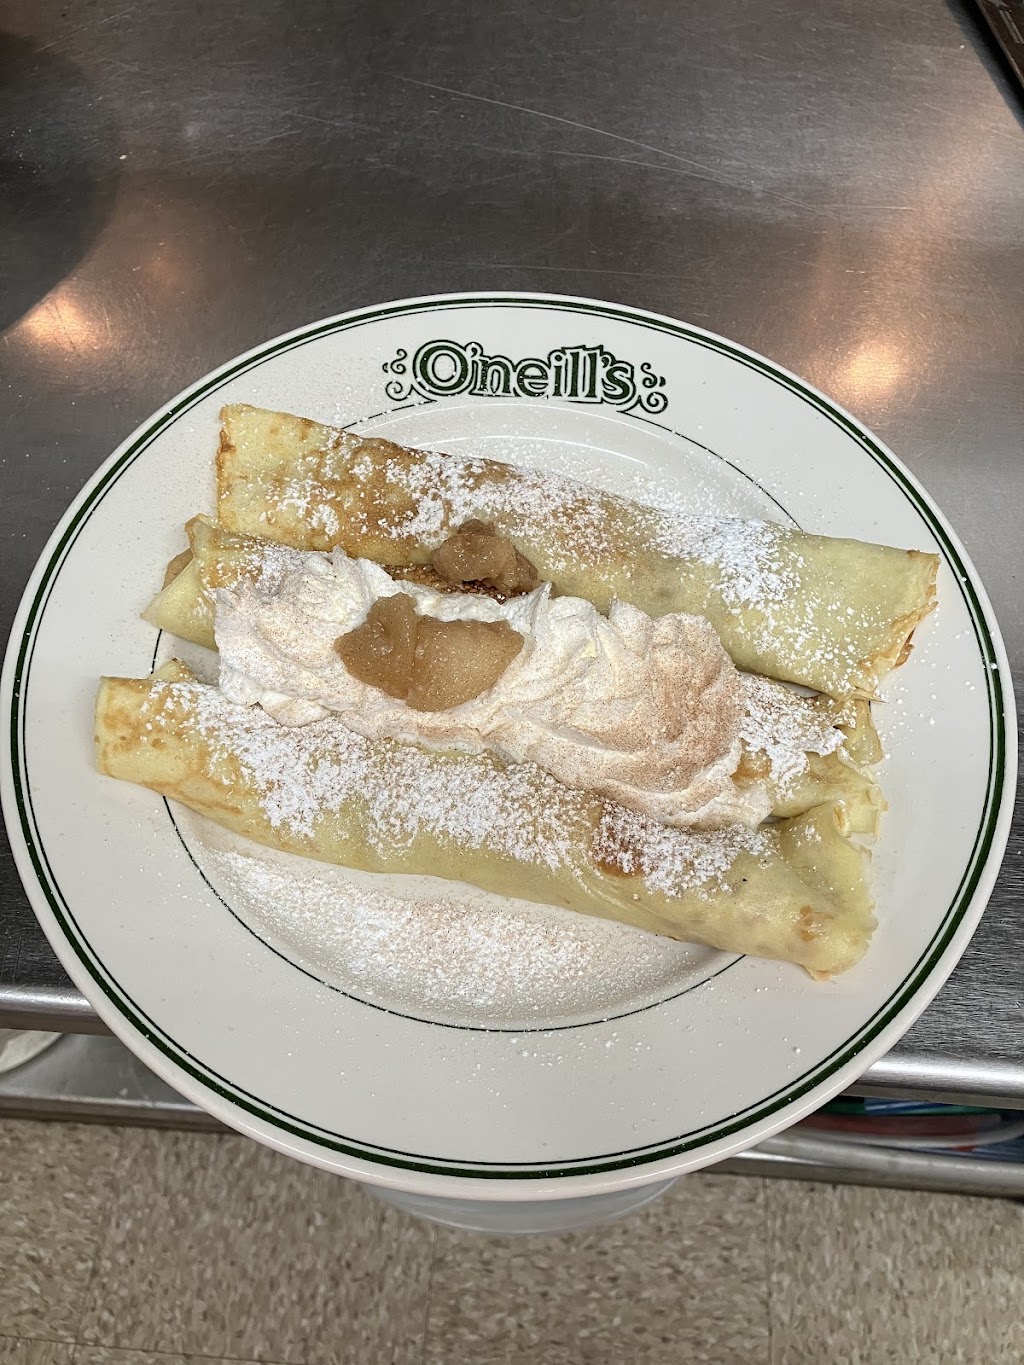 Charlie ONeills Cafe | 7 Co Rd 85, Cairo, NY 12413 | Phone: (518) 622-3612